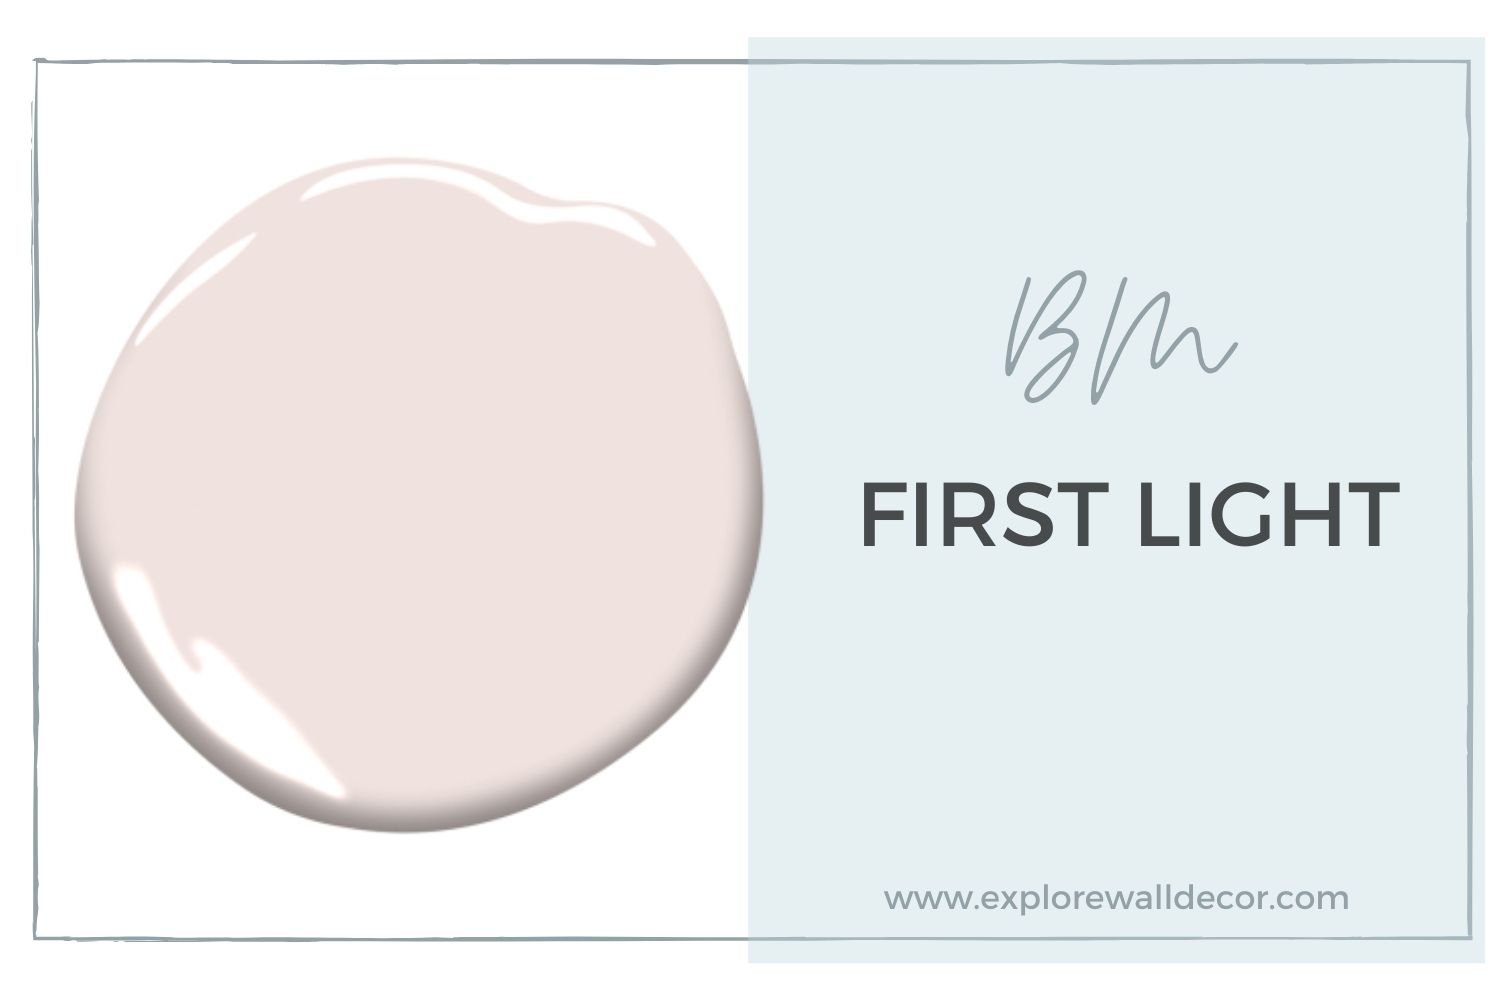 Benjamin First Light Paint Color Review - Explore Wall Decor